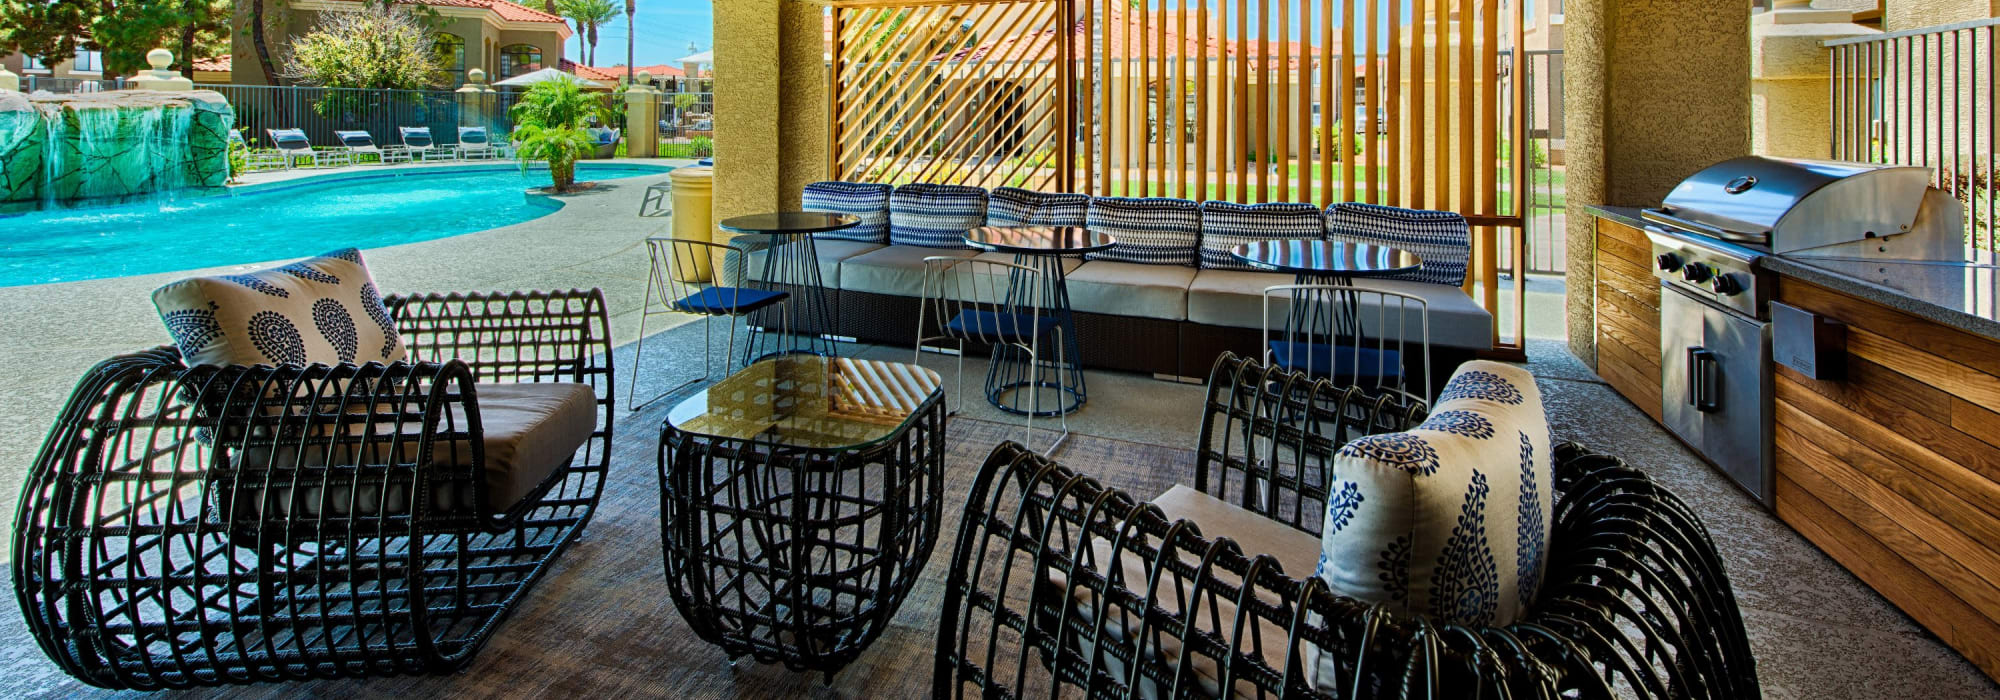 Outdoor lounge and grilling area at The Ventura in Chandler, Arizona